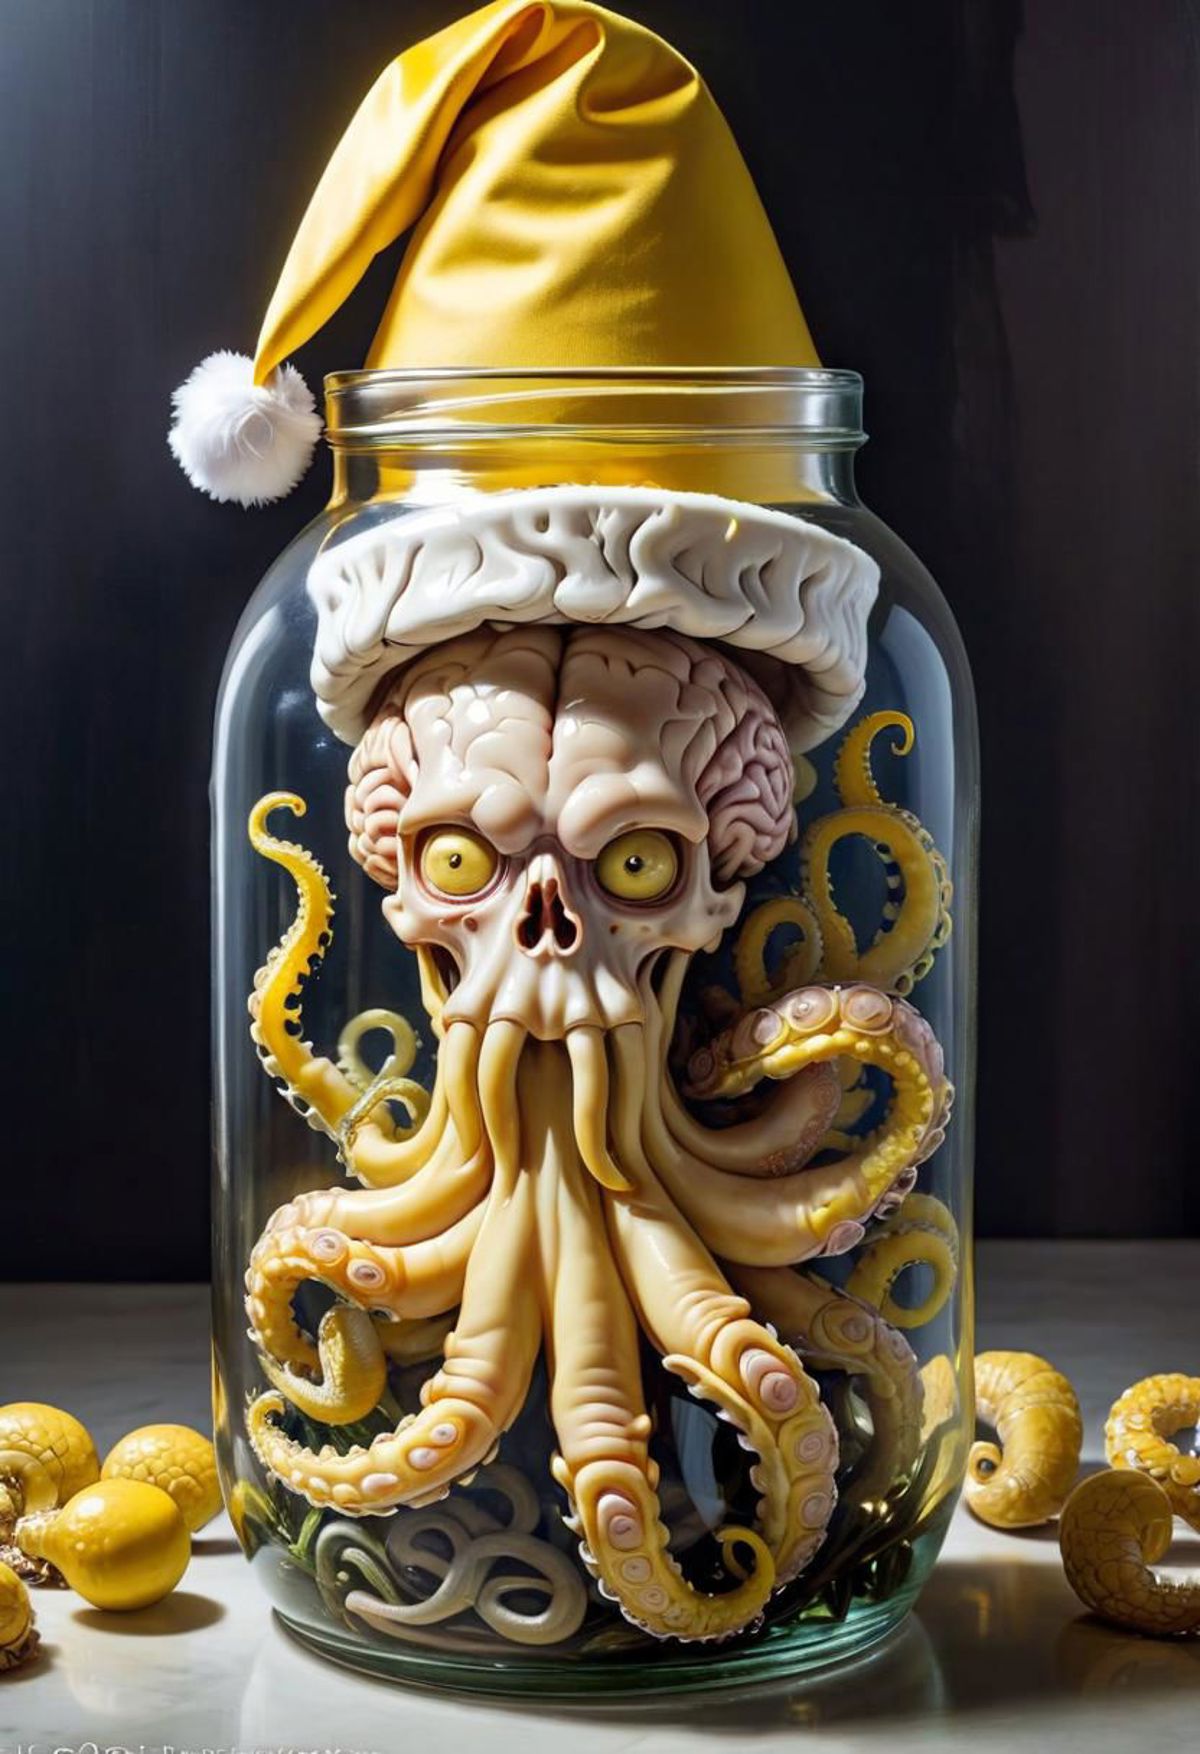 A Creepy Scary Octopus in a Jar with a Santa Hat.